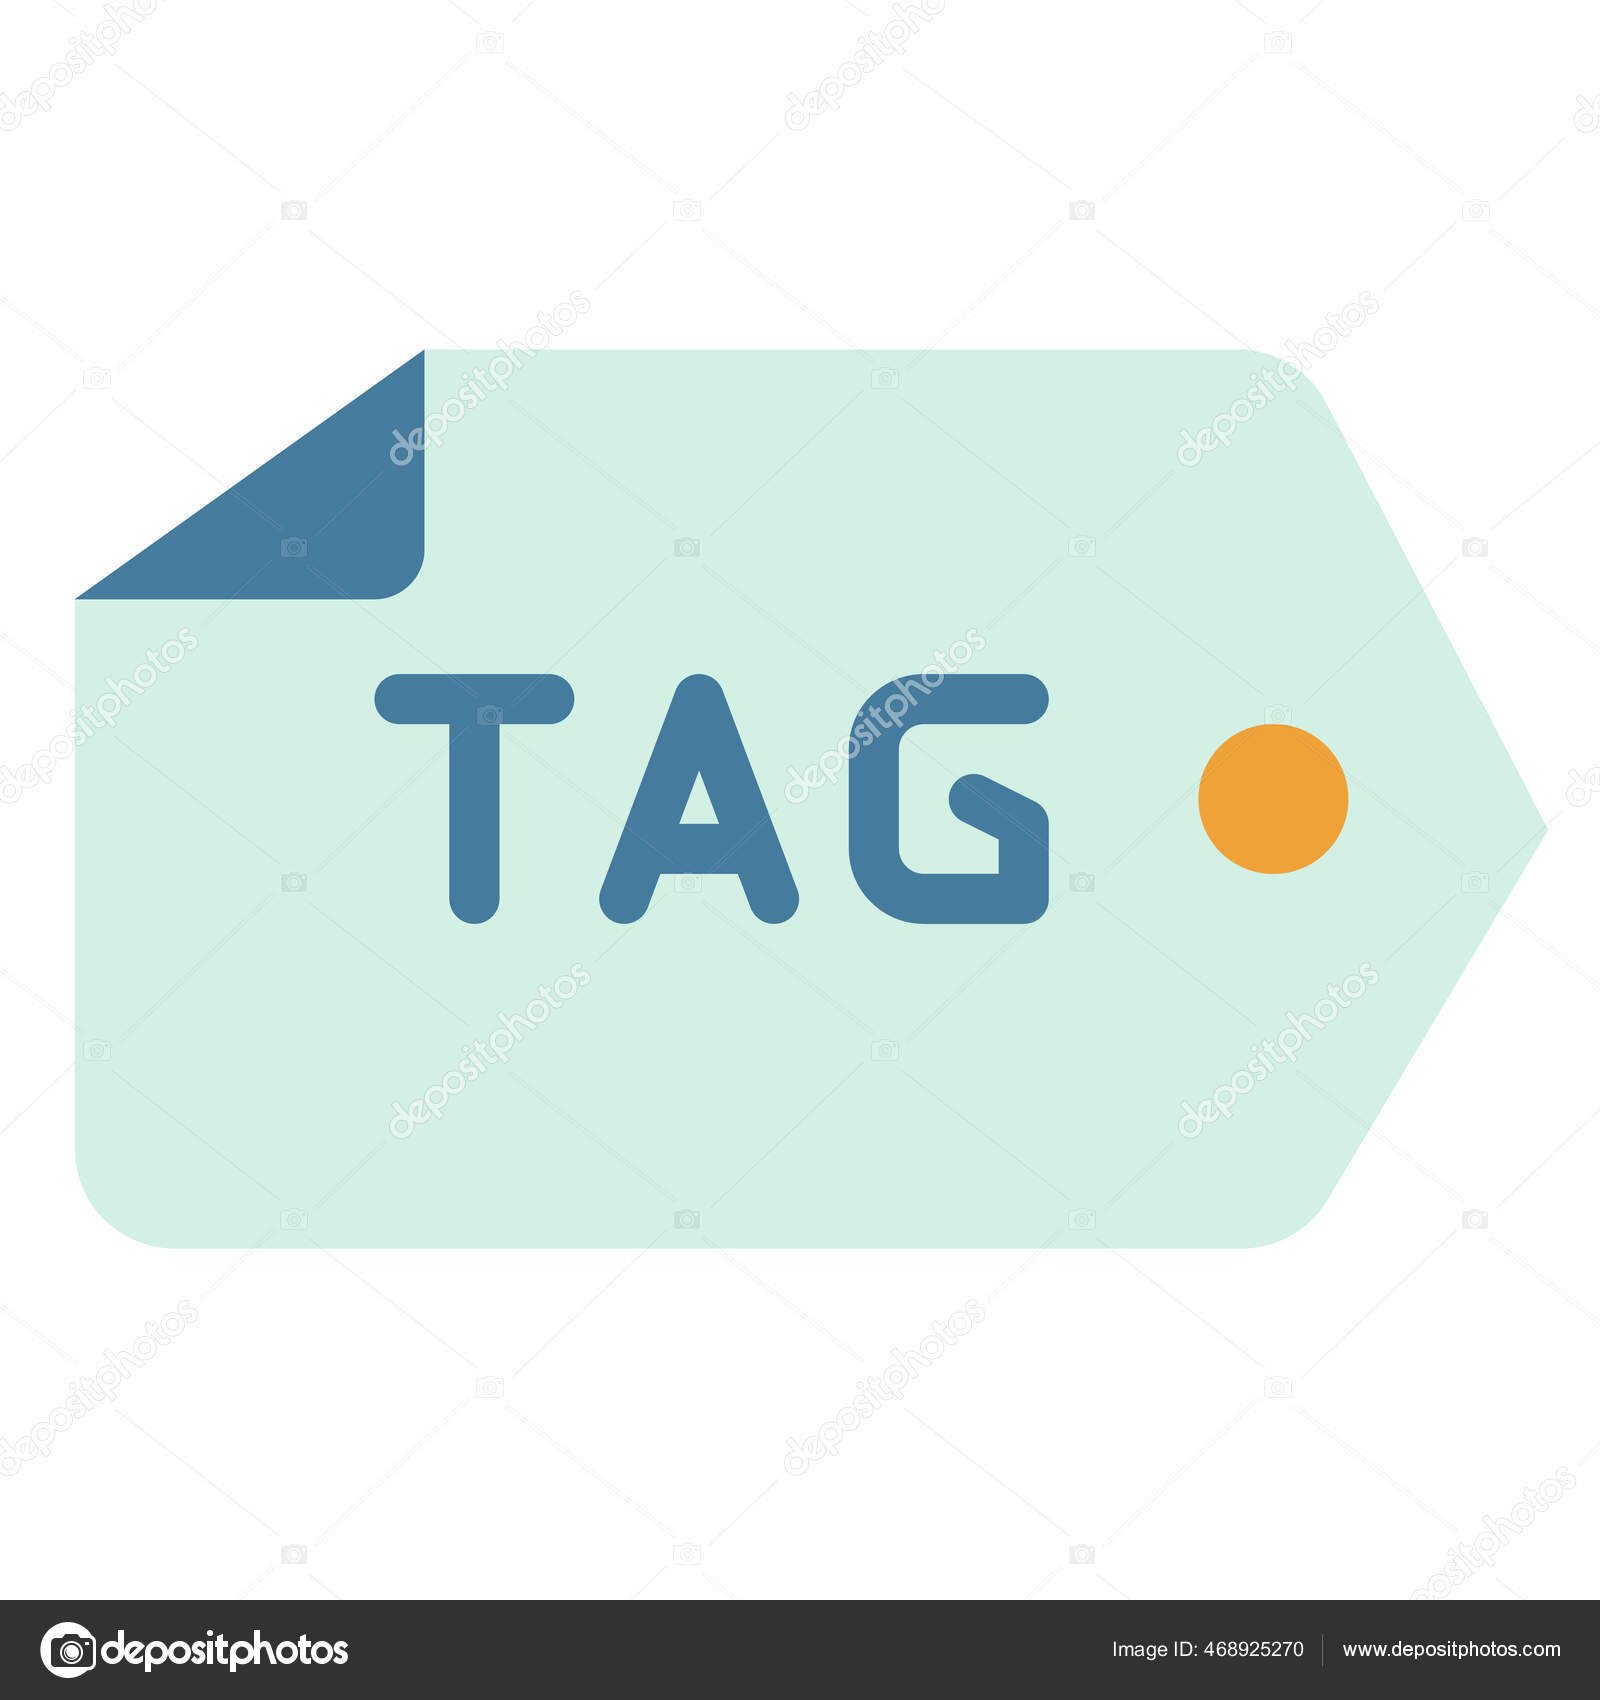 ging Seo Keyword Single Isolated Icon Flat Style Vector Vector Image By C Ghozymuhtarom94 Gmail Com Vector Stock